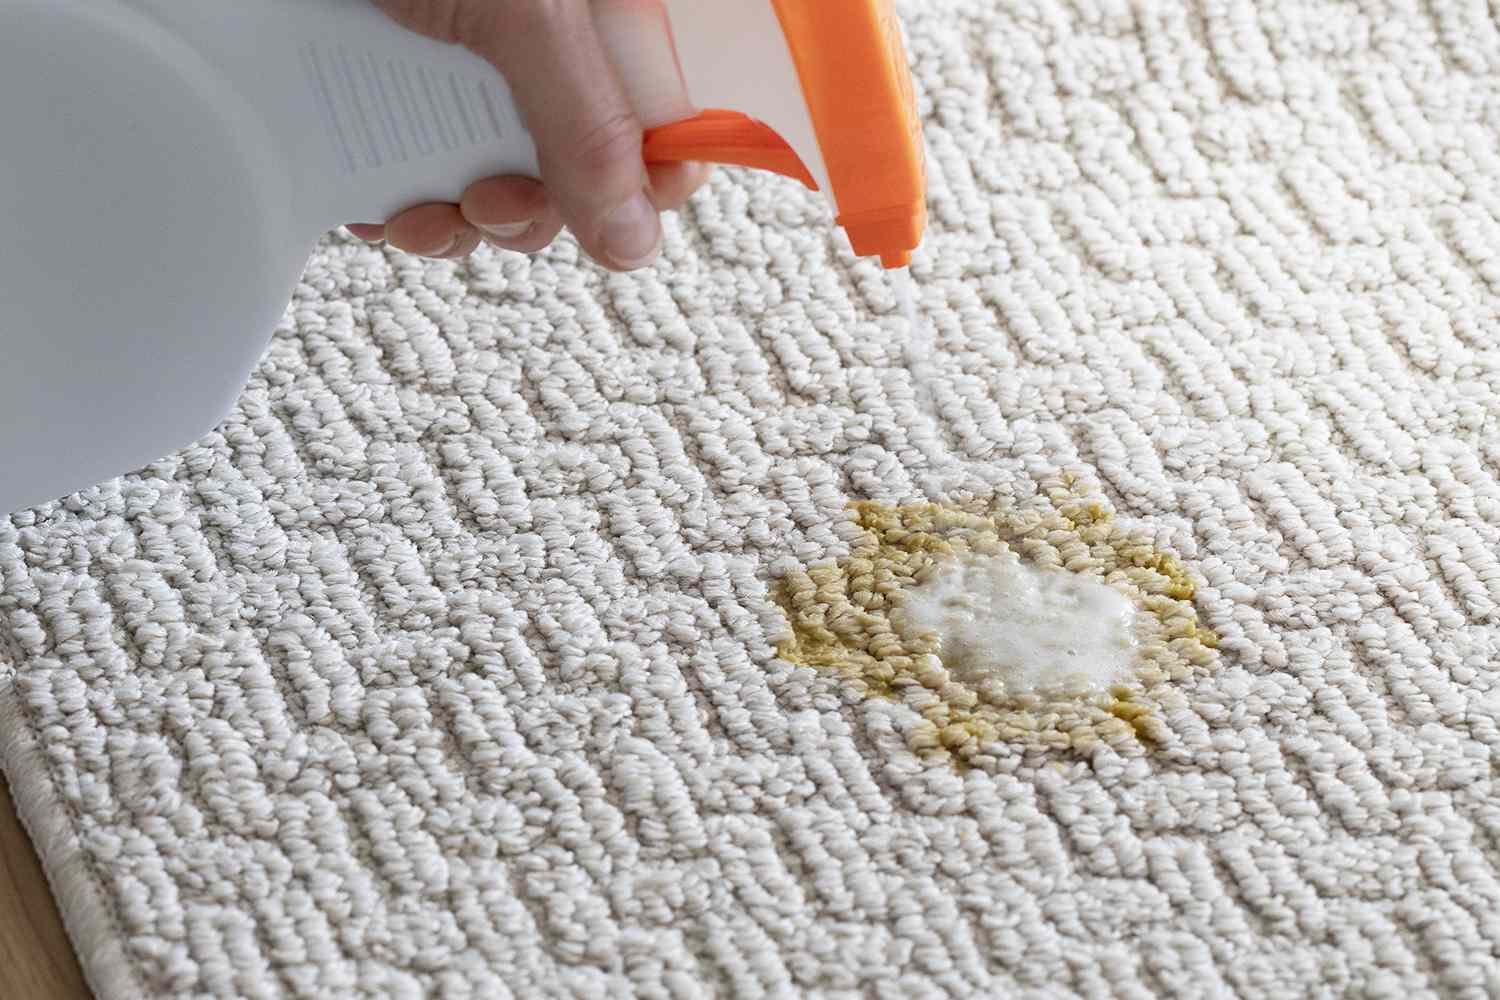 How To Clean Vomit From Floor